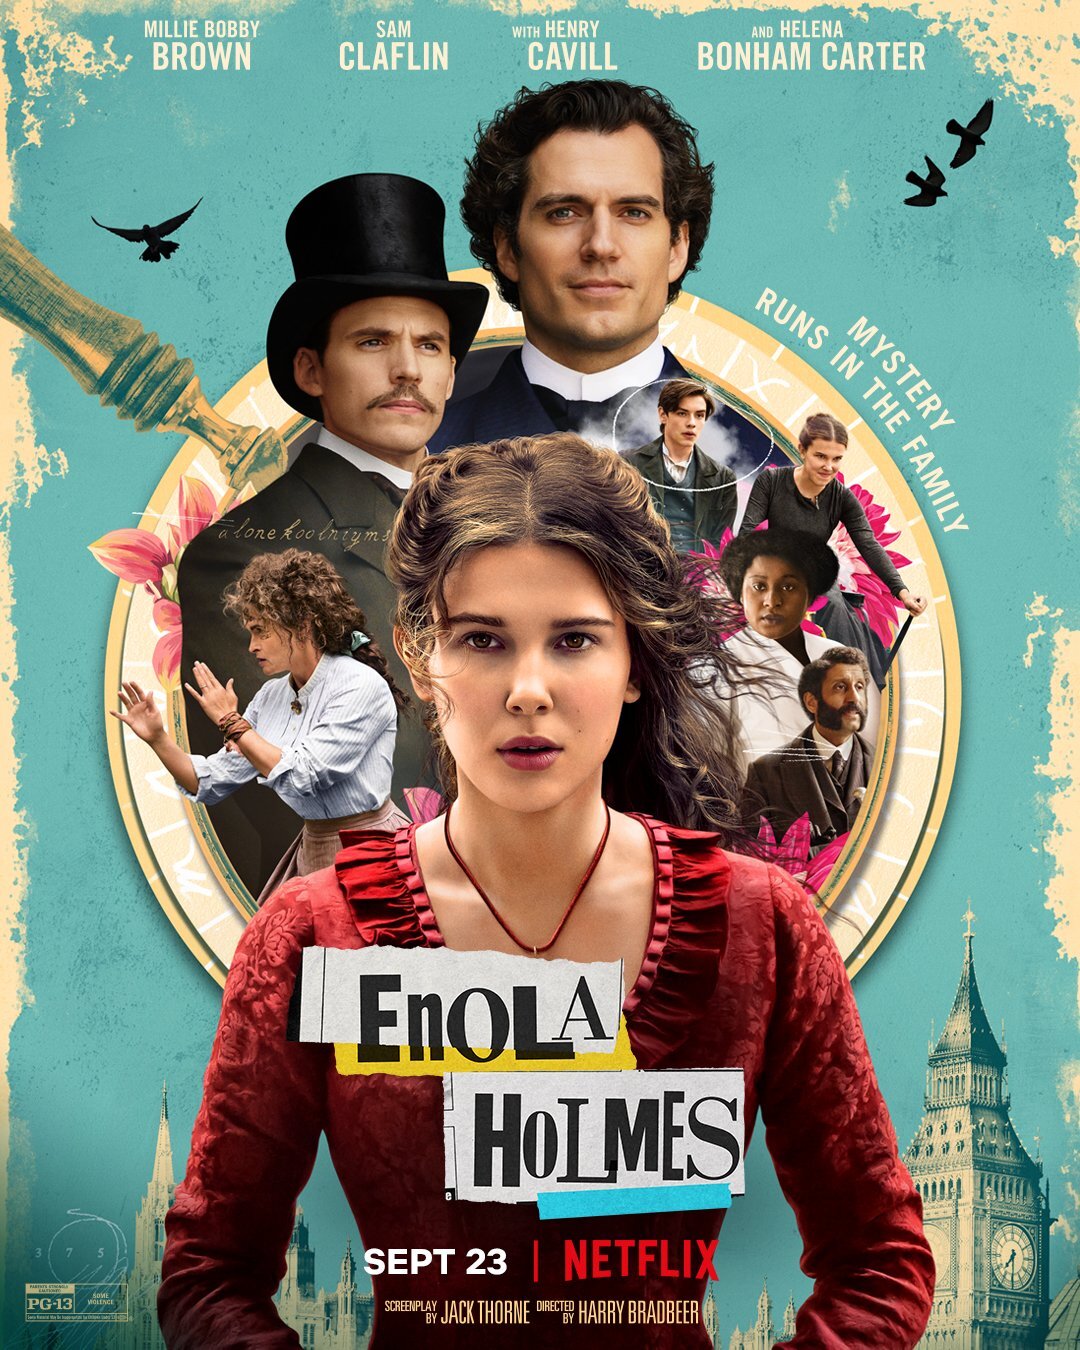 new-poster-for-millie-bobby-browns-sherlock-holmes-inspired-film-enola-holmes3